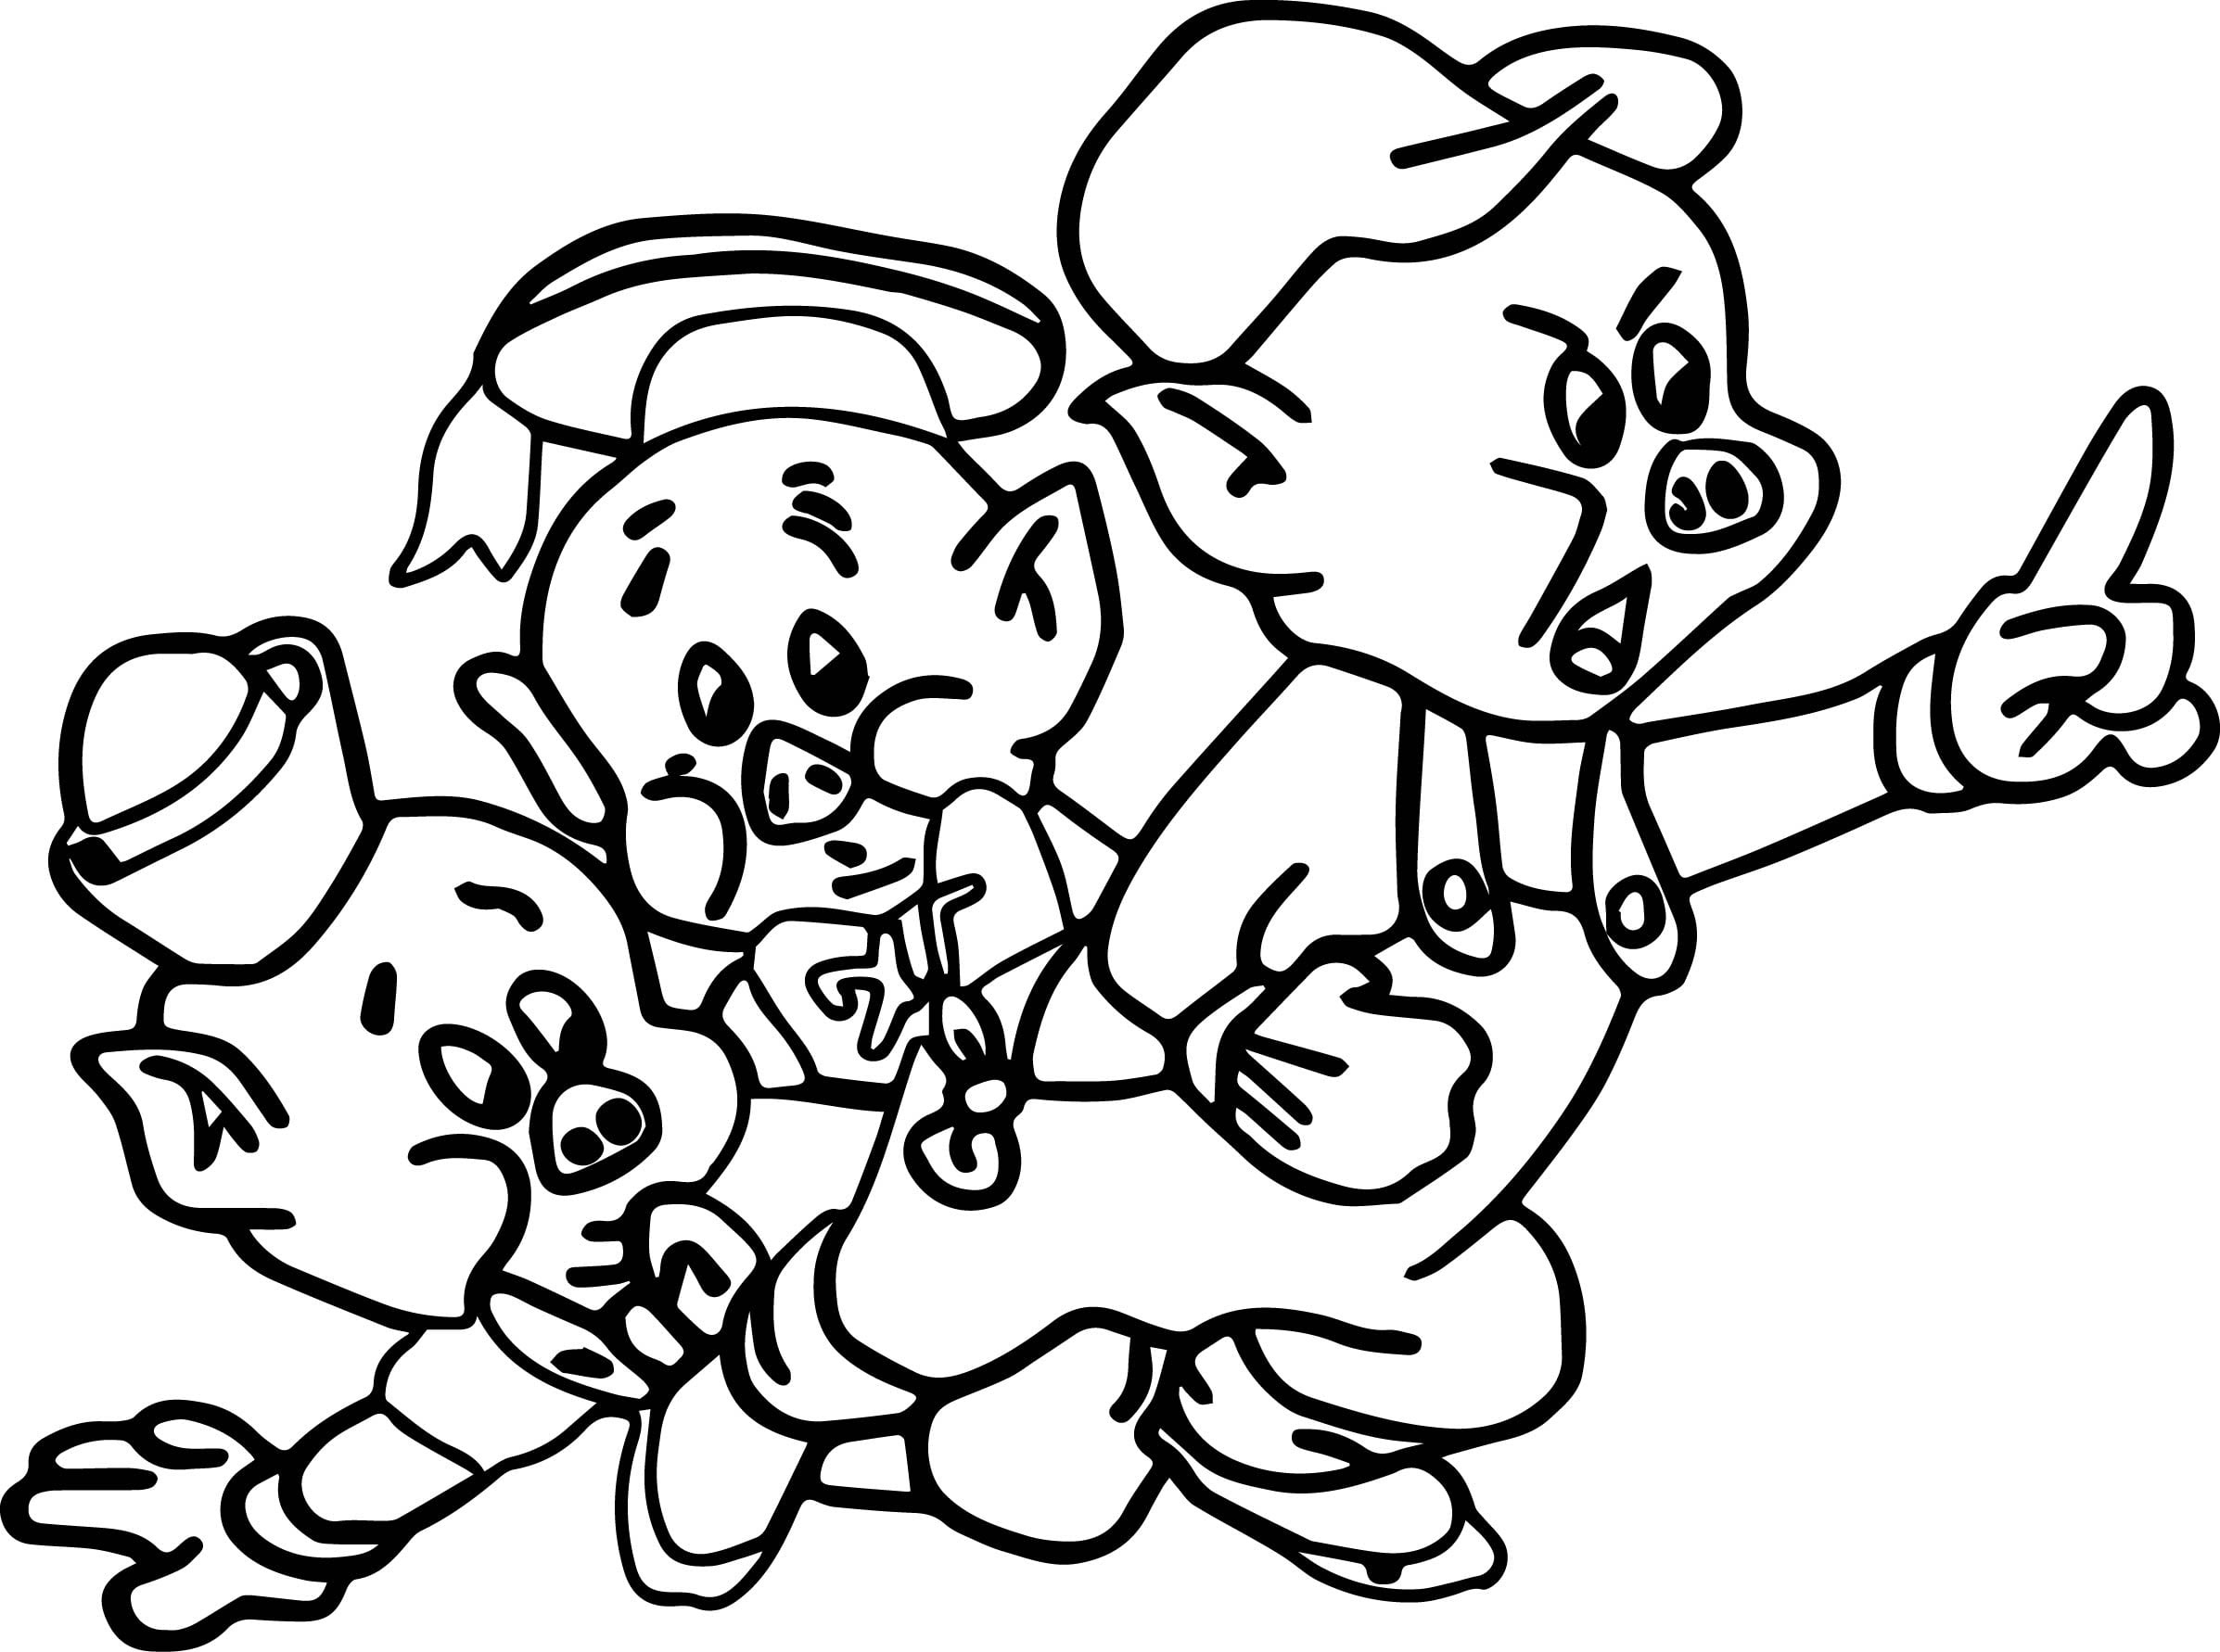 Three Little Pig Coloring Page Wecoloringpage Com Coloring Pages